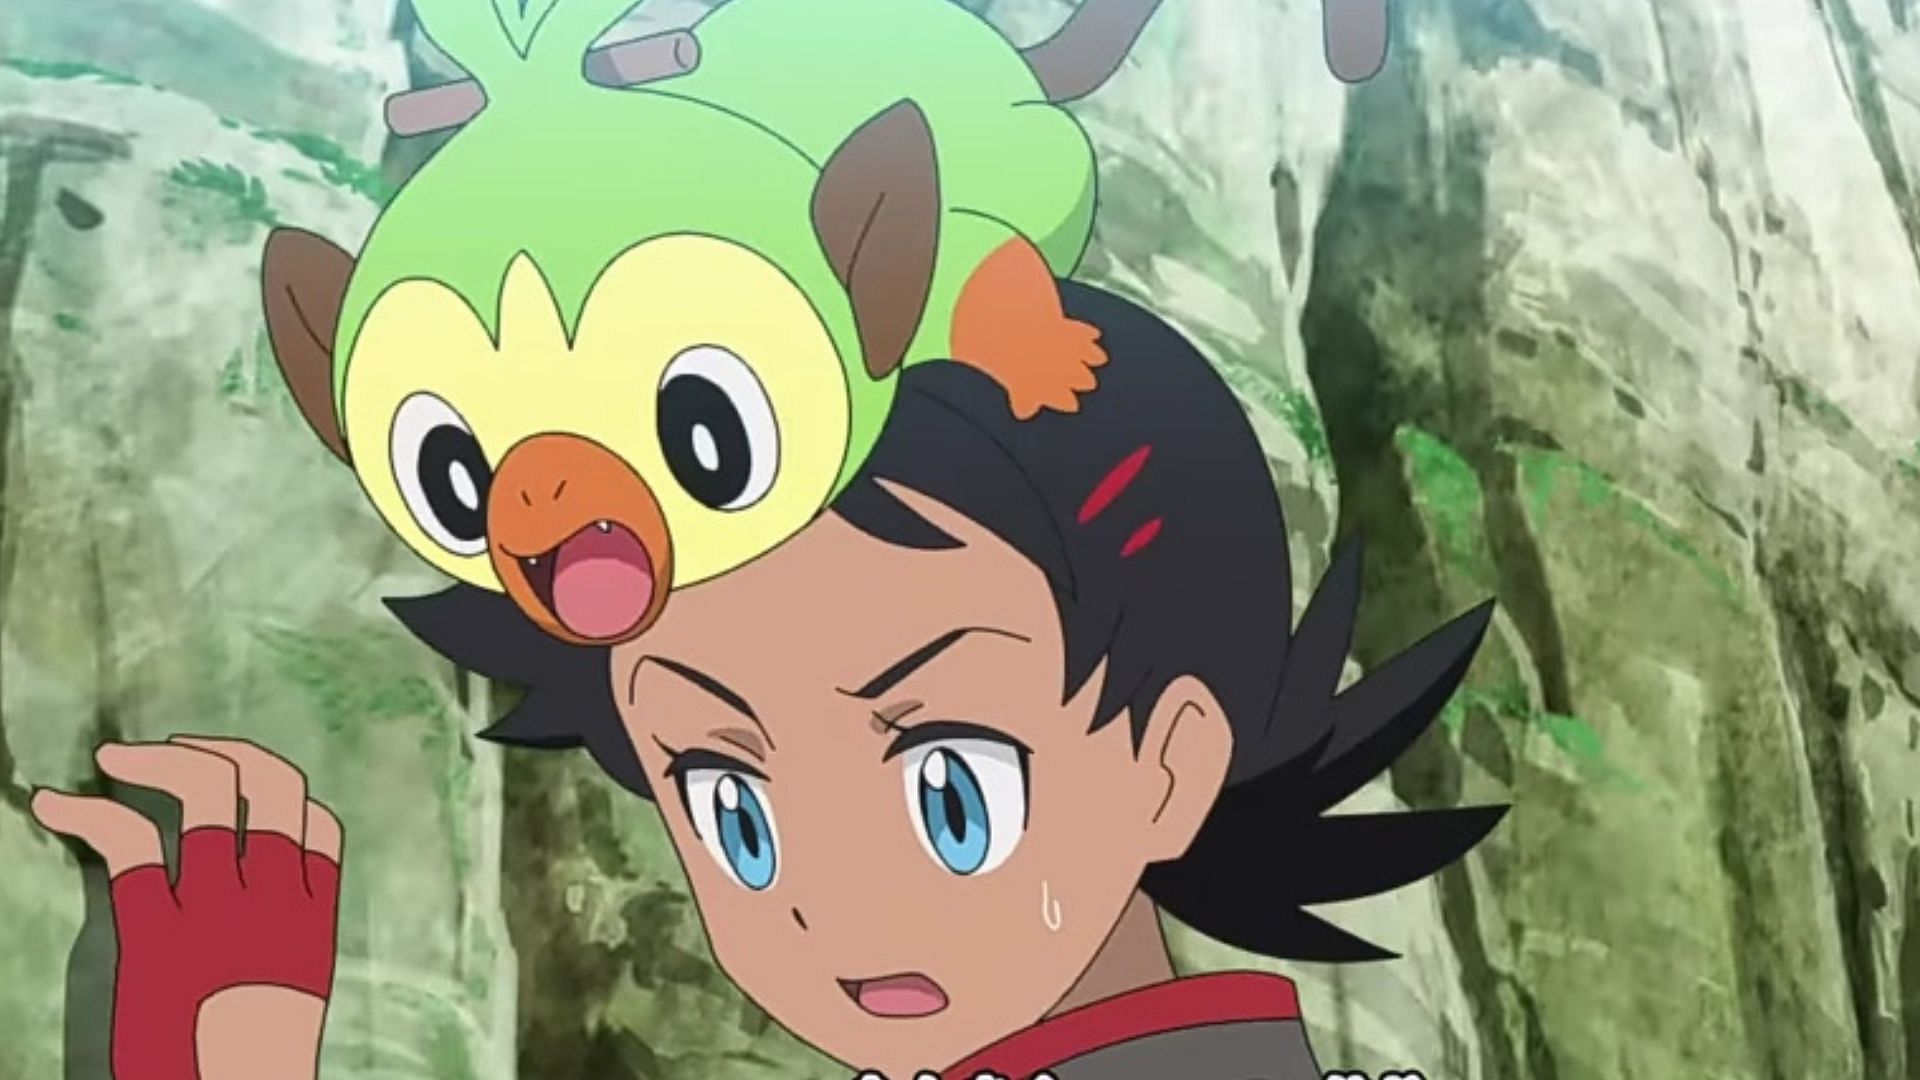 Goh as seen in the anime (Image via OLM)